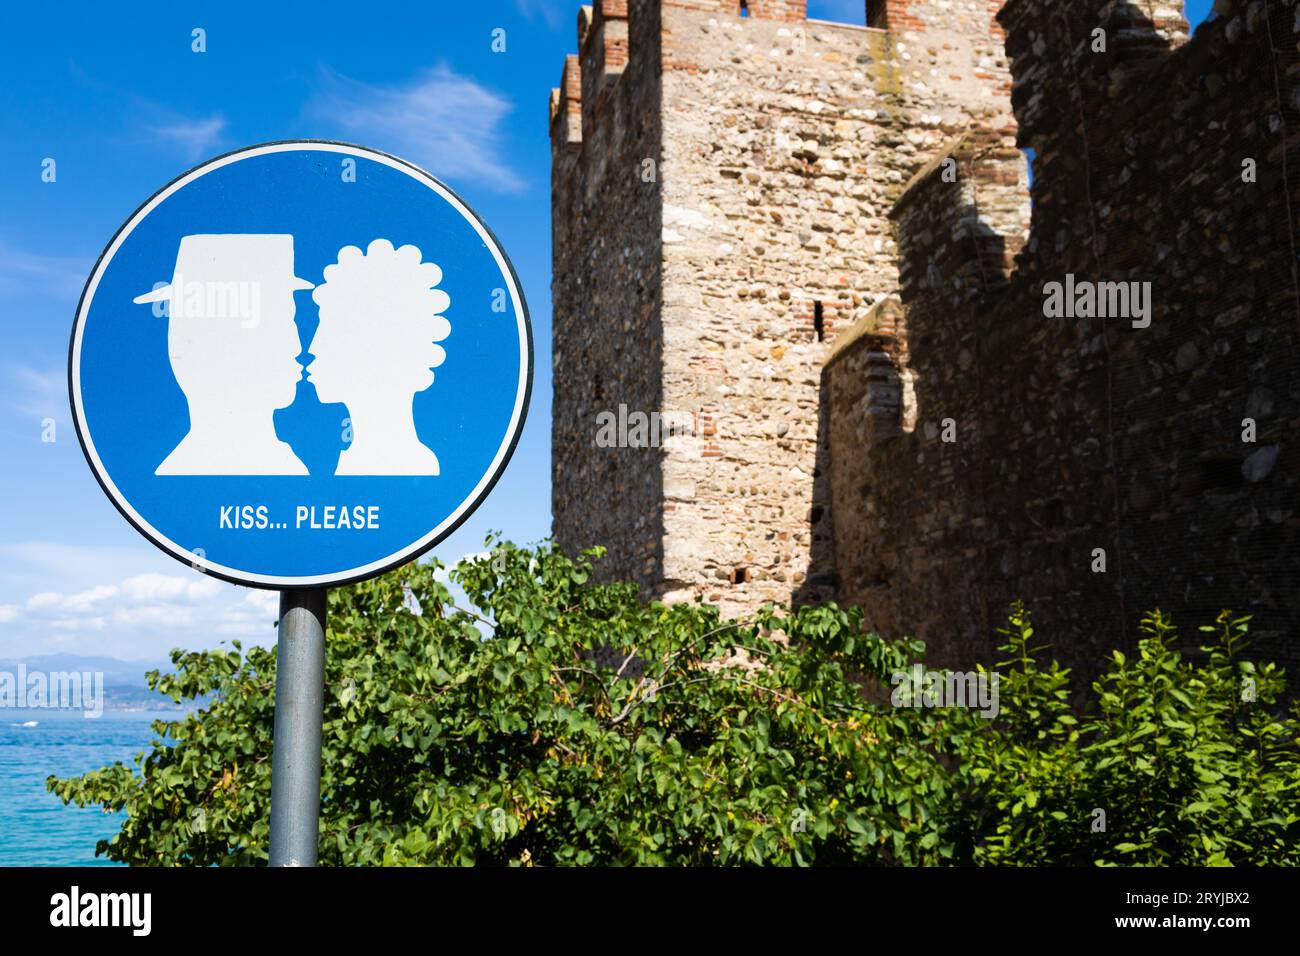 Kiss street sign located in public area in front of Sirmione castle, Italy. Concept of love, couple, romantic. Stock Photo